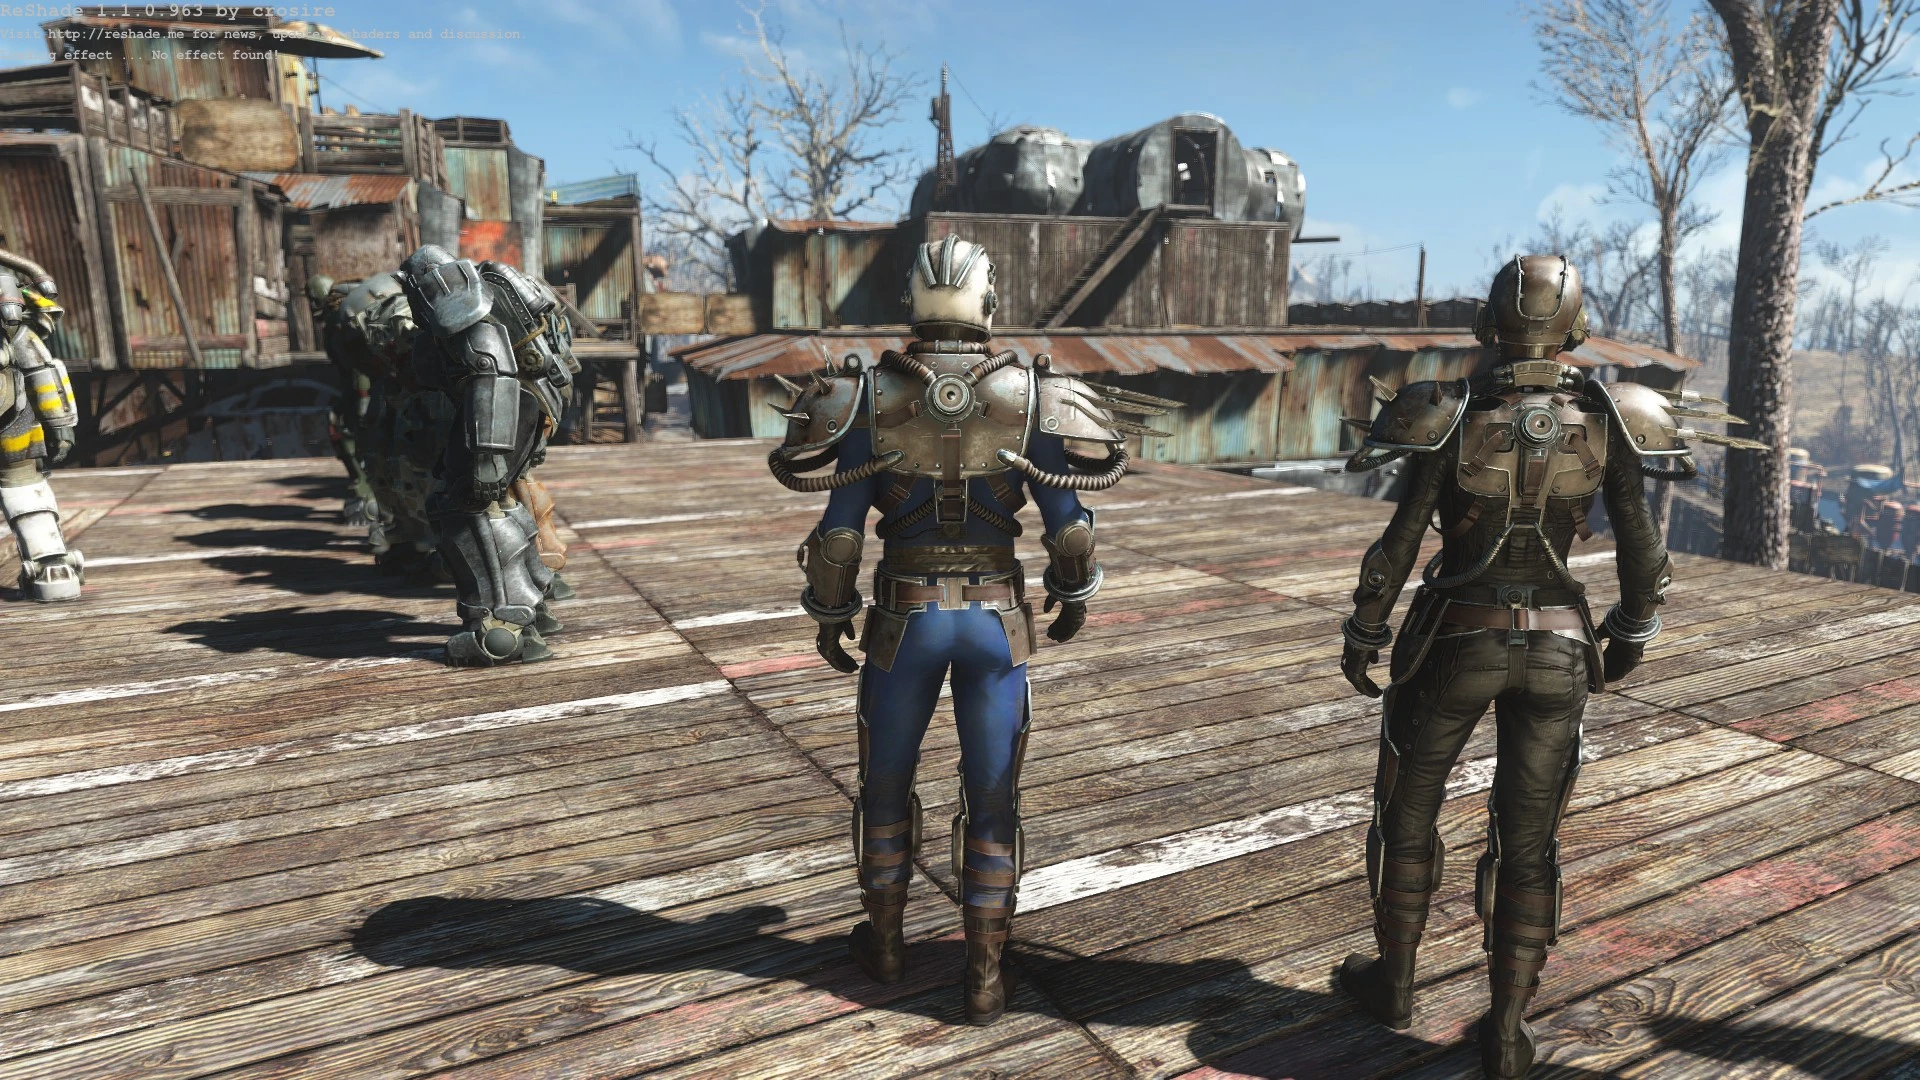 Capital wasteland robot pack fallout 4 фото 26